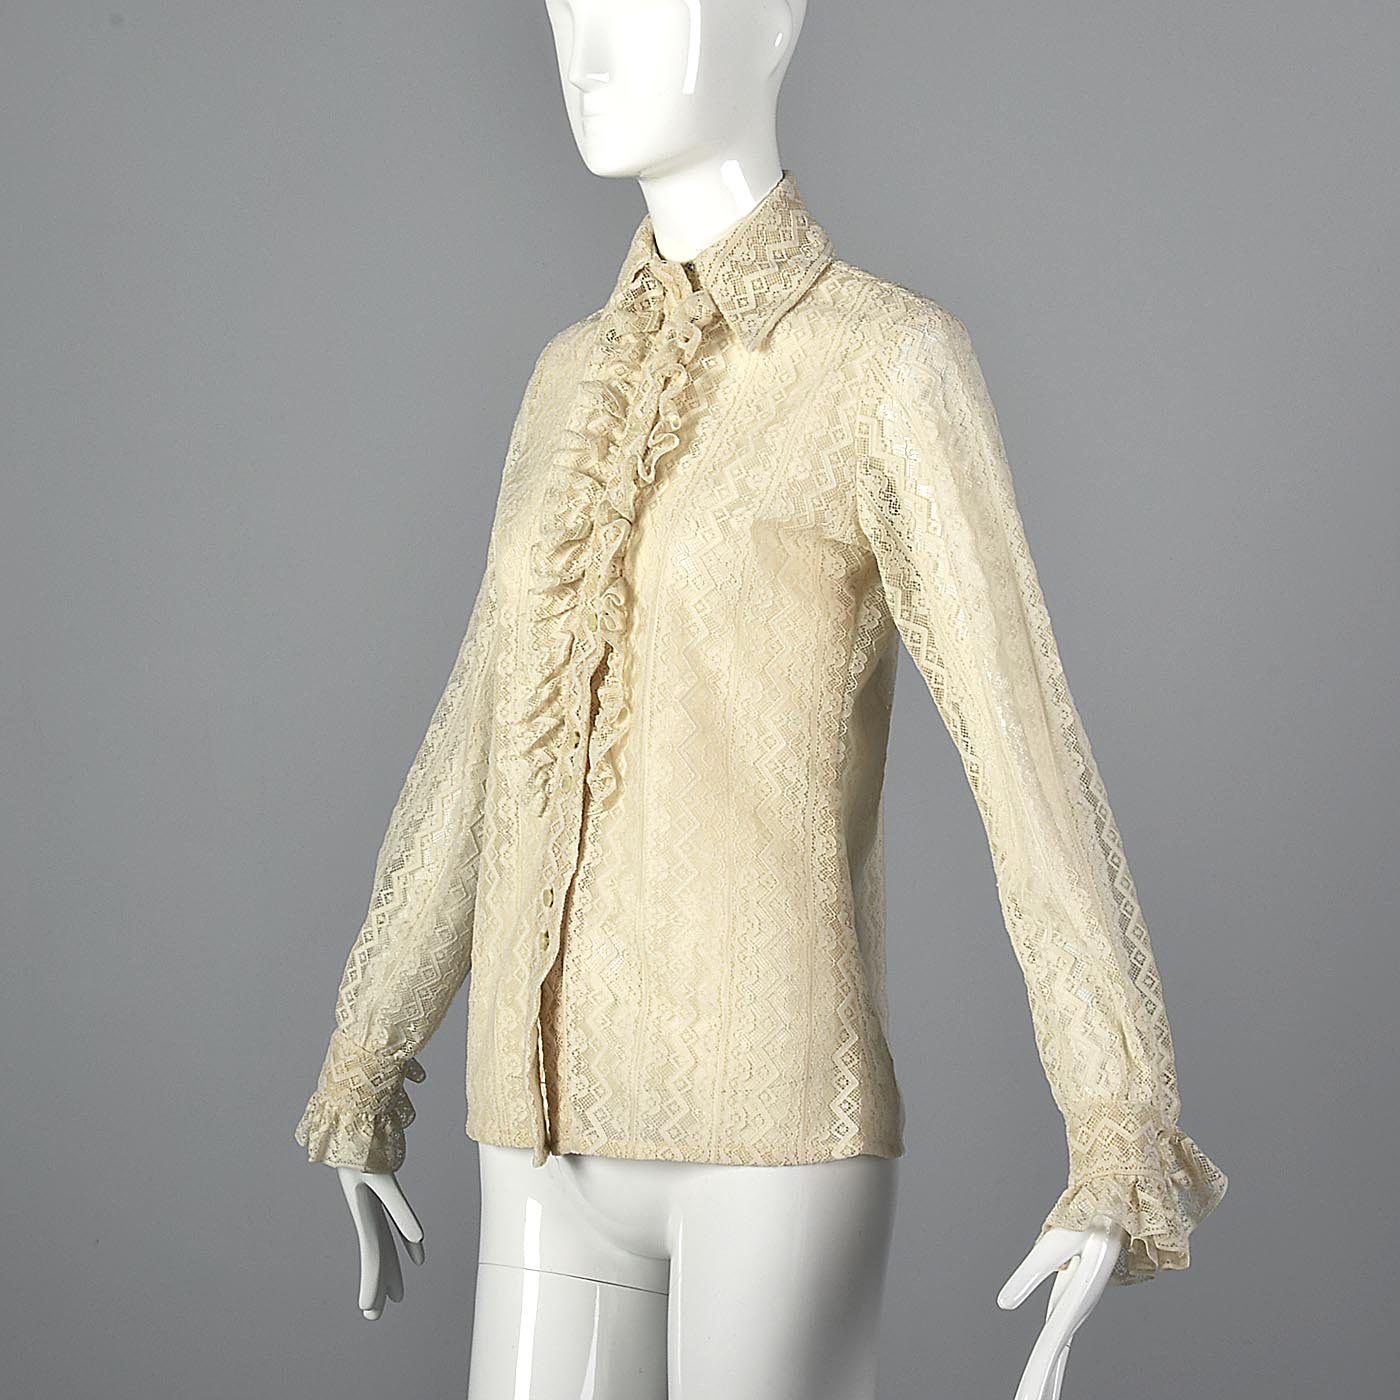 1970s Lace Blouse with Tuxedo Ruffle Front